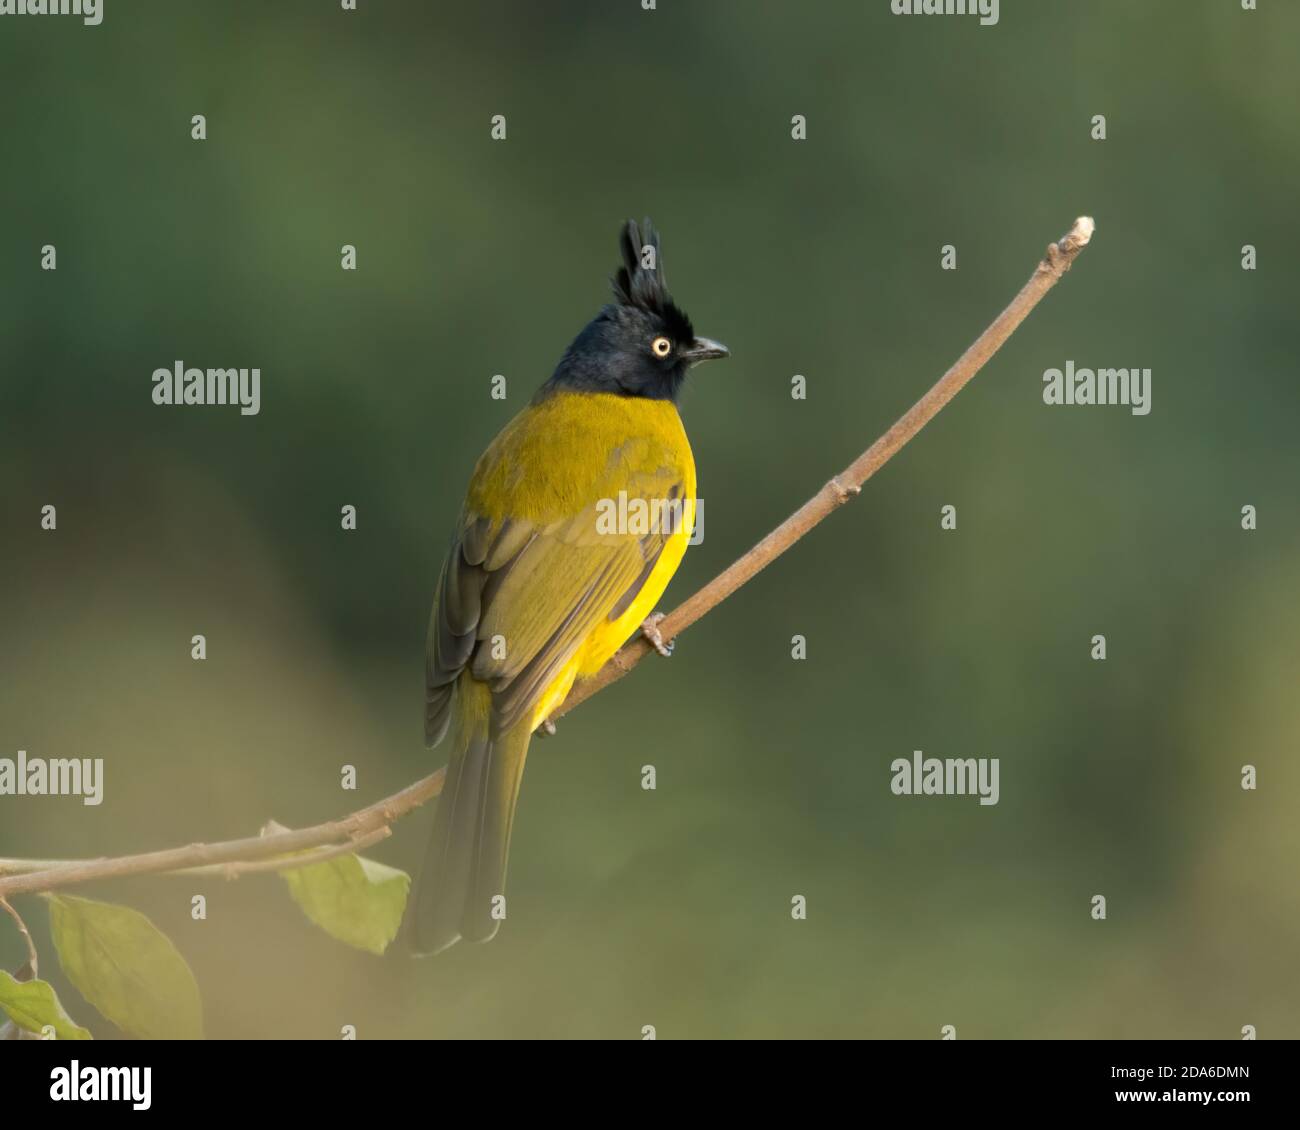 Black-crested Bulbul (Pycnonotus flaviventris), perched back-facing, in the forests of Ramnagar in Uttarakhand, India. Stock Photo